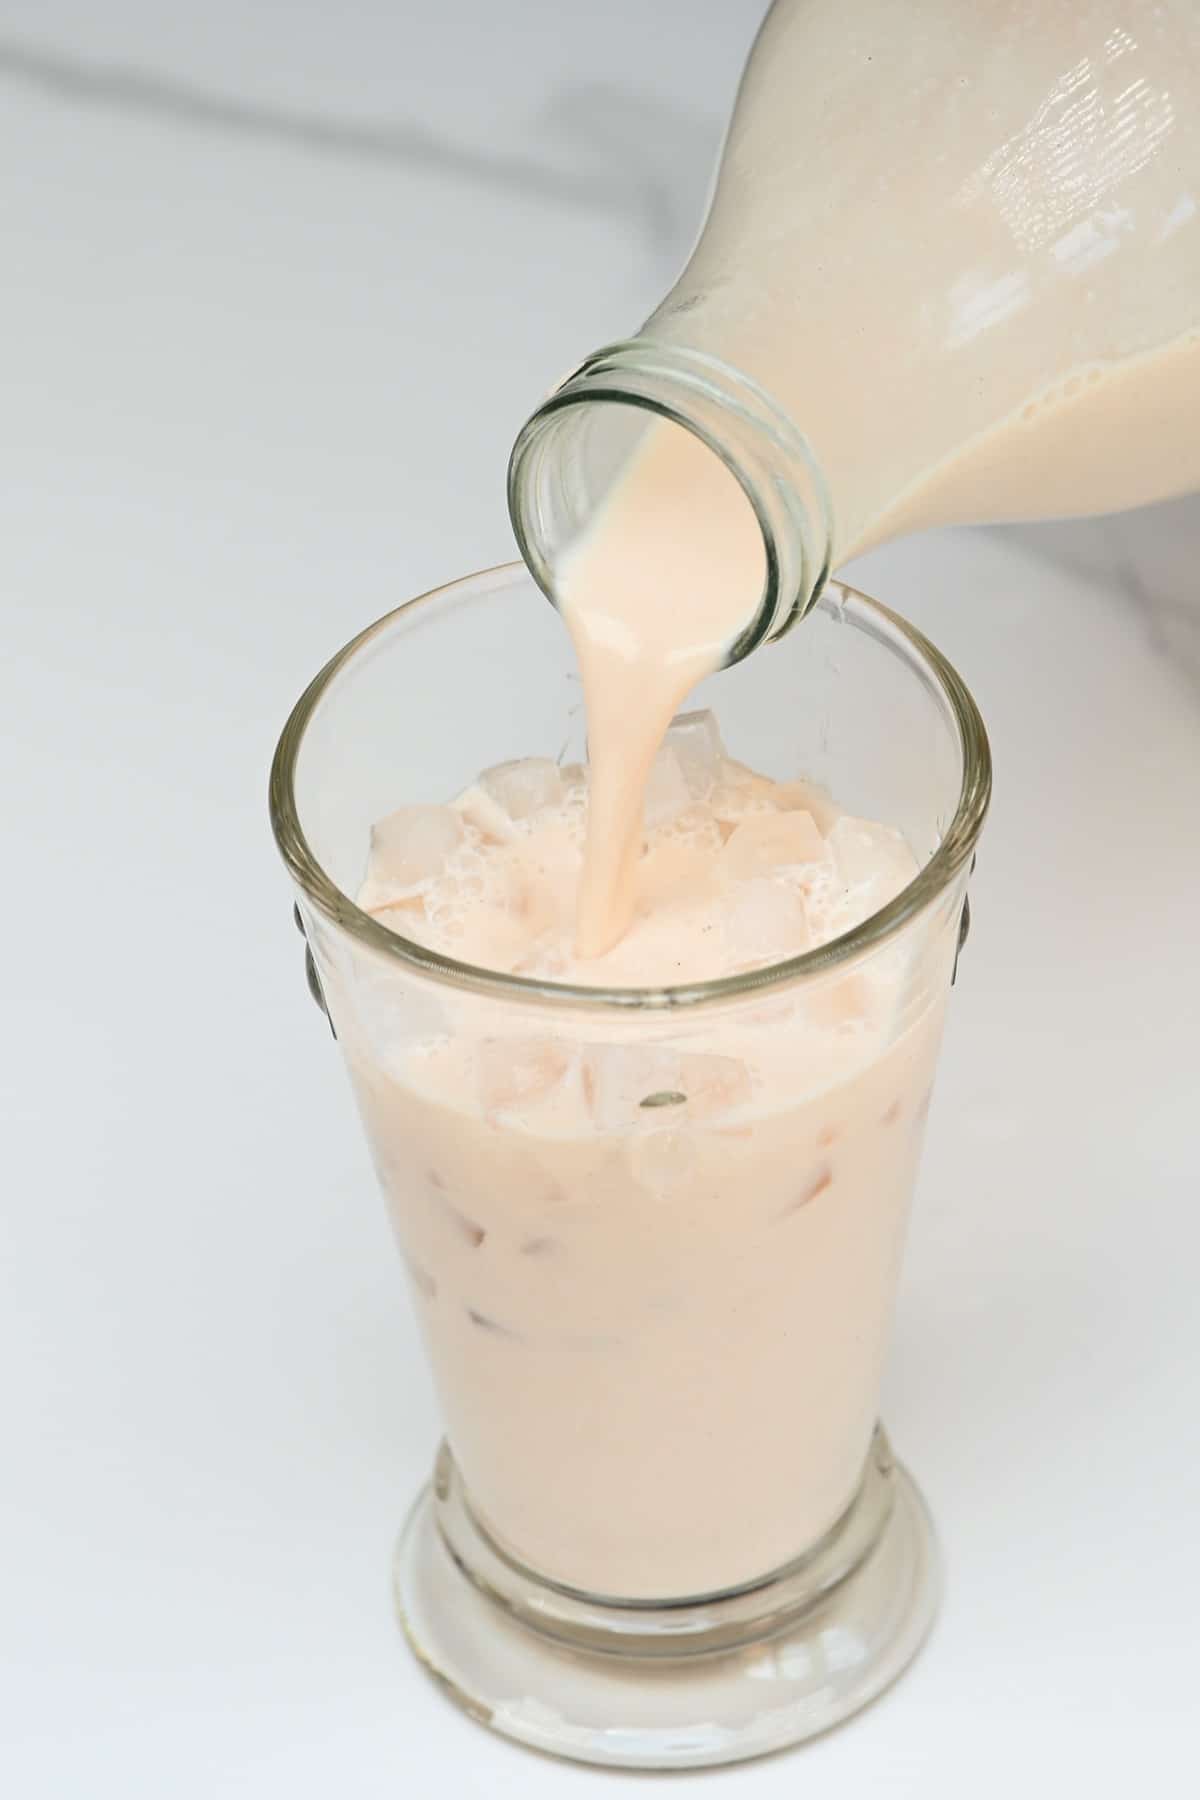 Pouring horchata in a glass